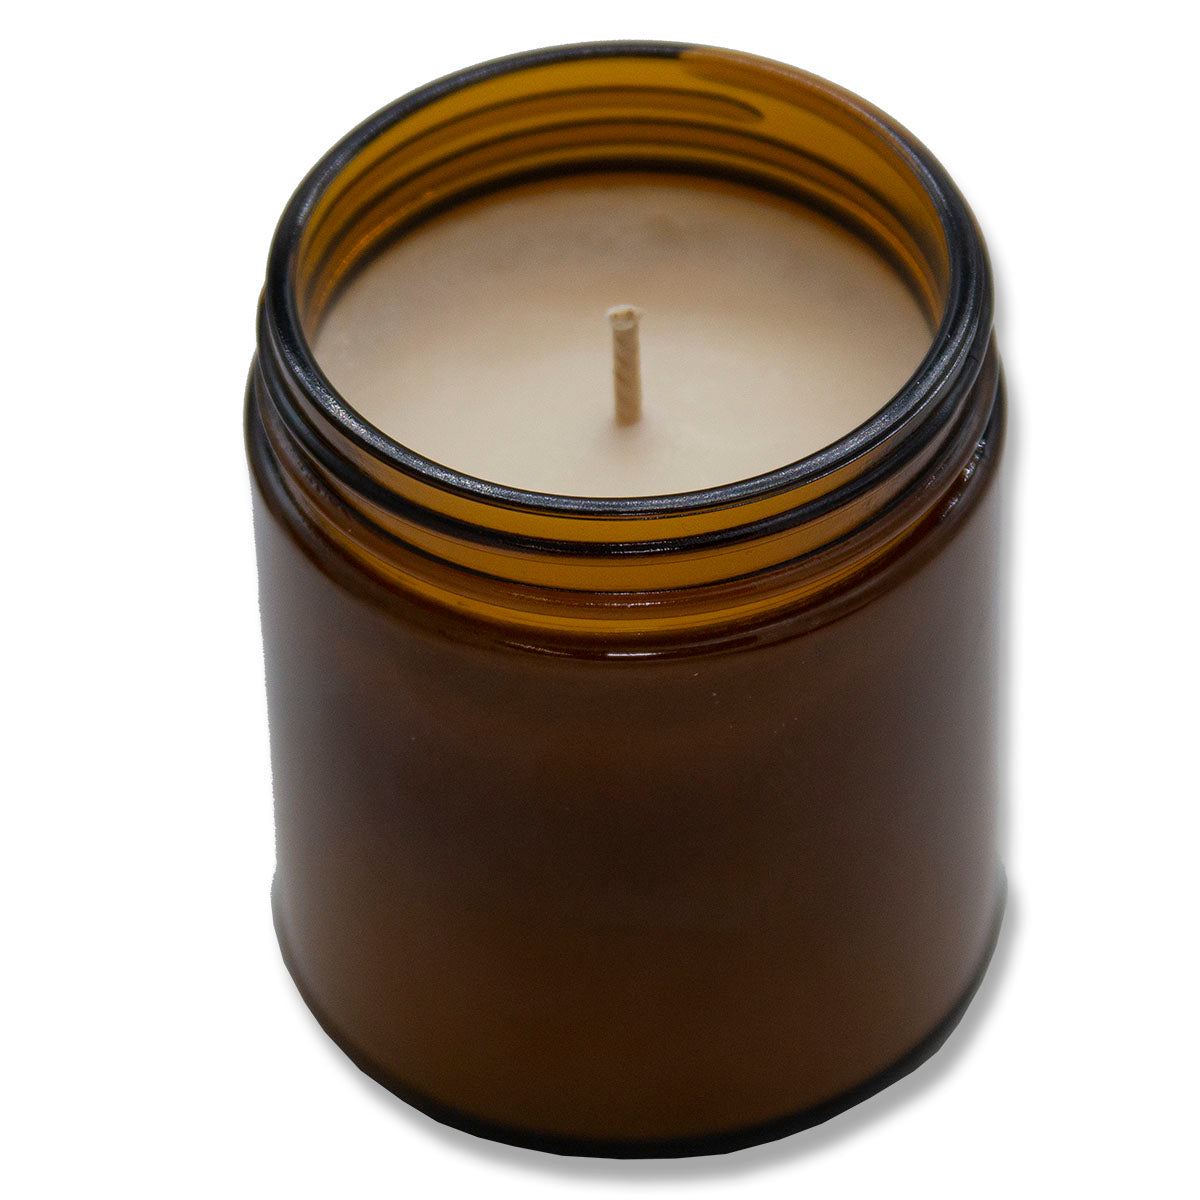 Cinnamon Vanilla, Lone Star Candles & More's Premium Hand Poured Strong Scented Soy Wax Gift Candle, Ground Cinnamon & Sweet Vanilla Bean, USA Made in Texas, Round Amber Glass Jars, 9oz Best Mom